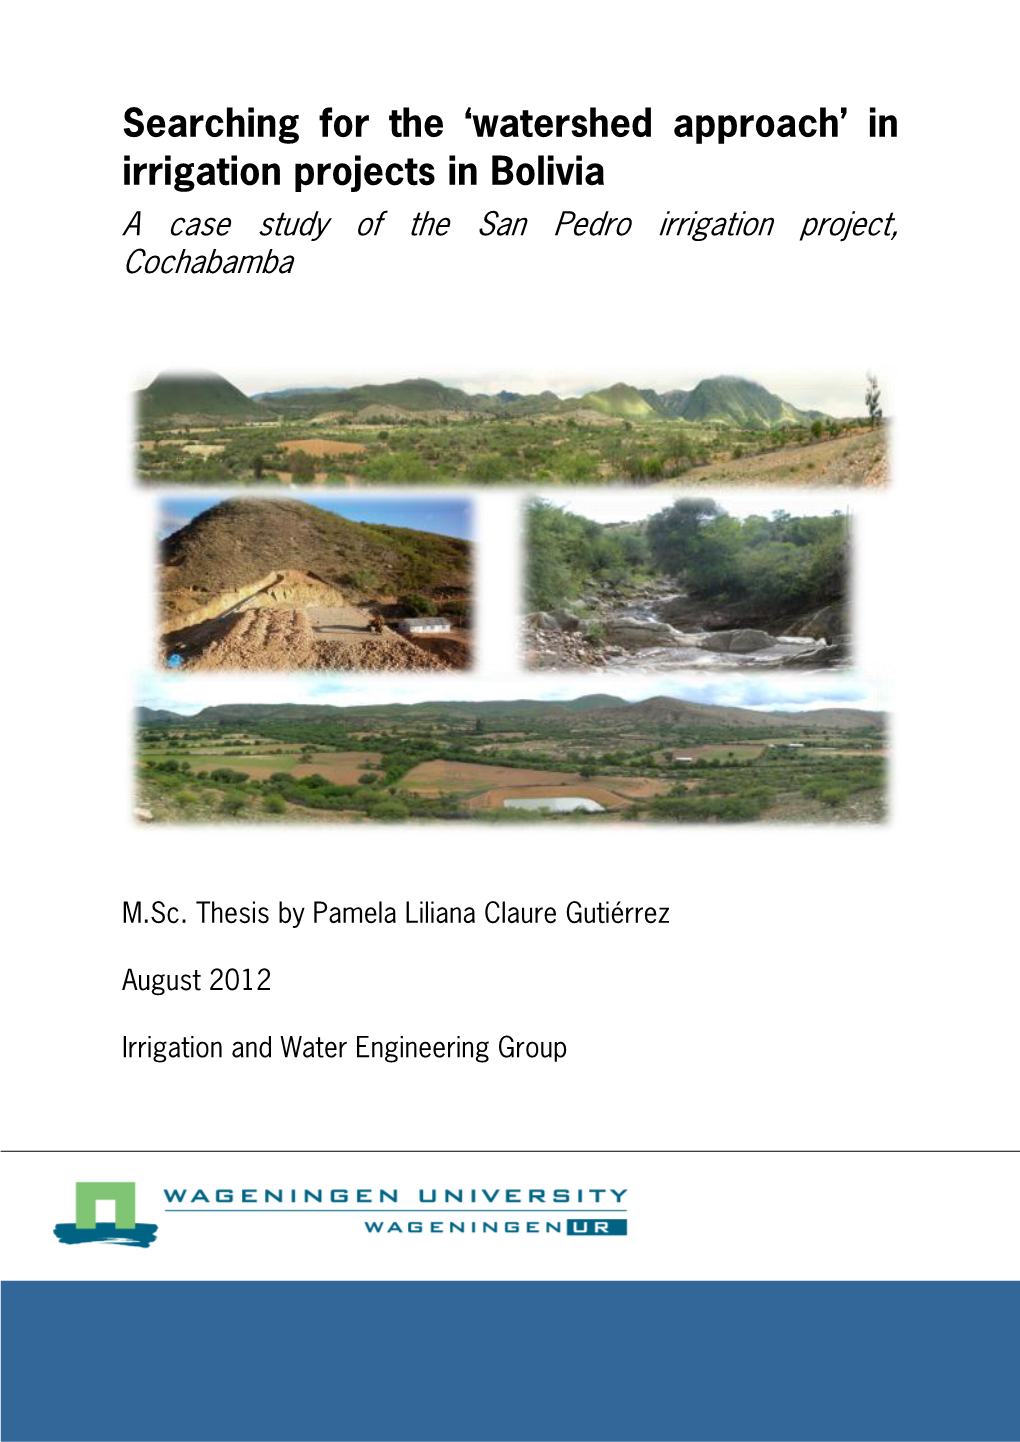 Watershed Approach’ in Irrigation Projects in Bolivia a Case Study of the San Pedro Irrigation Project, Cochabamba